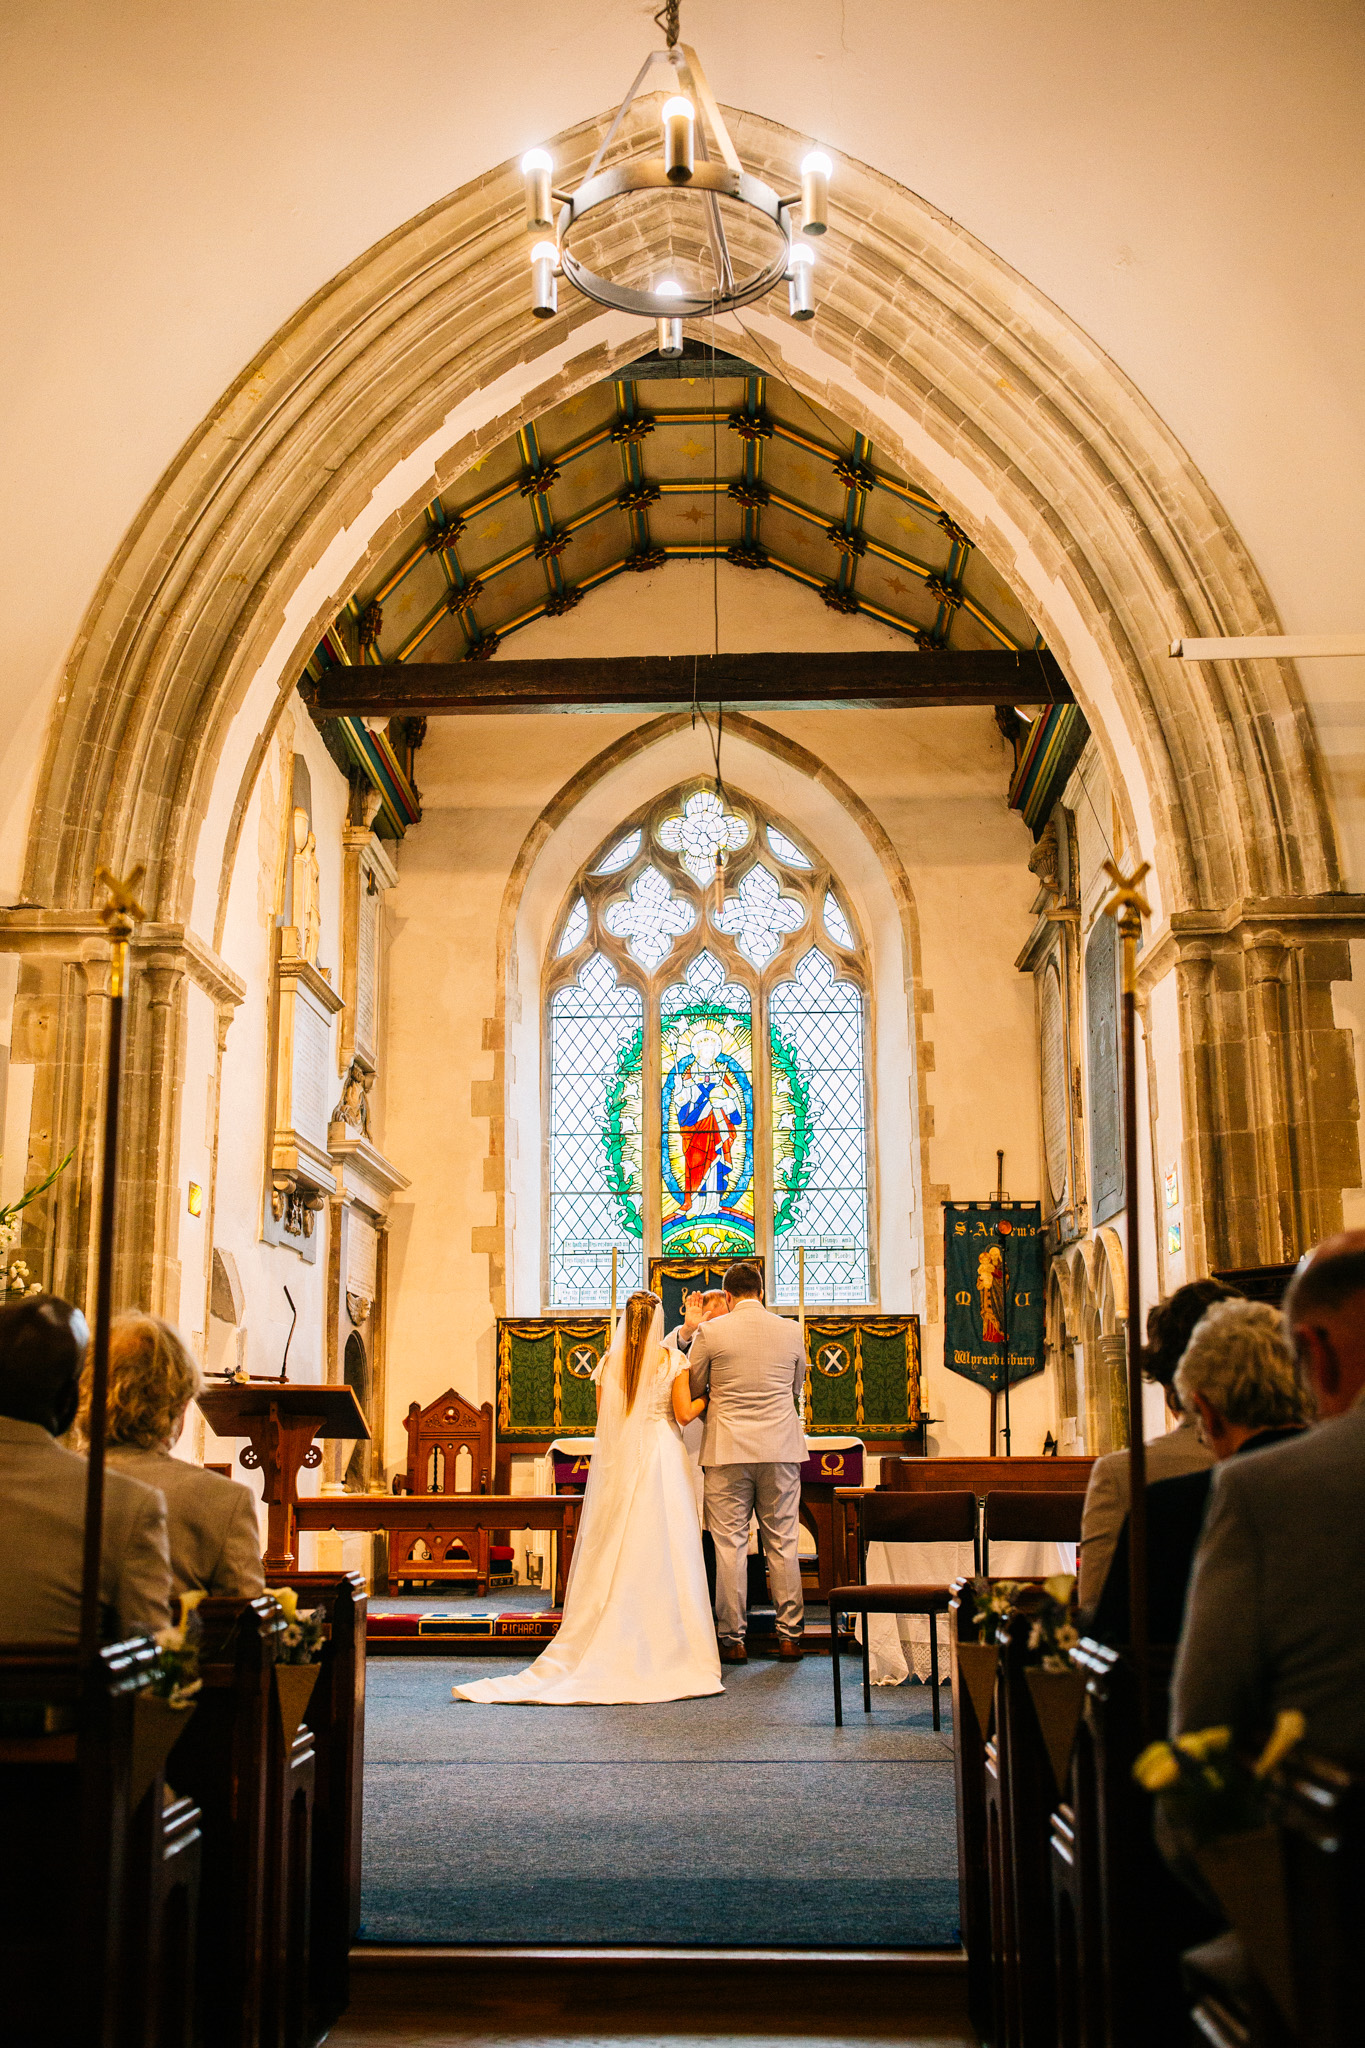 Angelina and Andrew get married – St. Peter's church, Braunstone Park